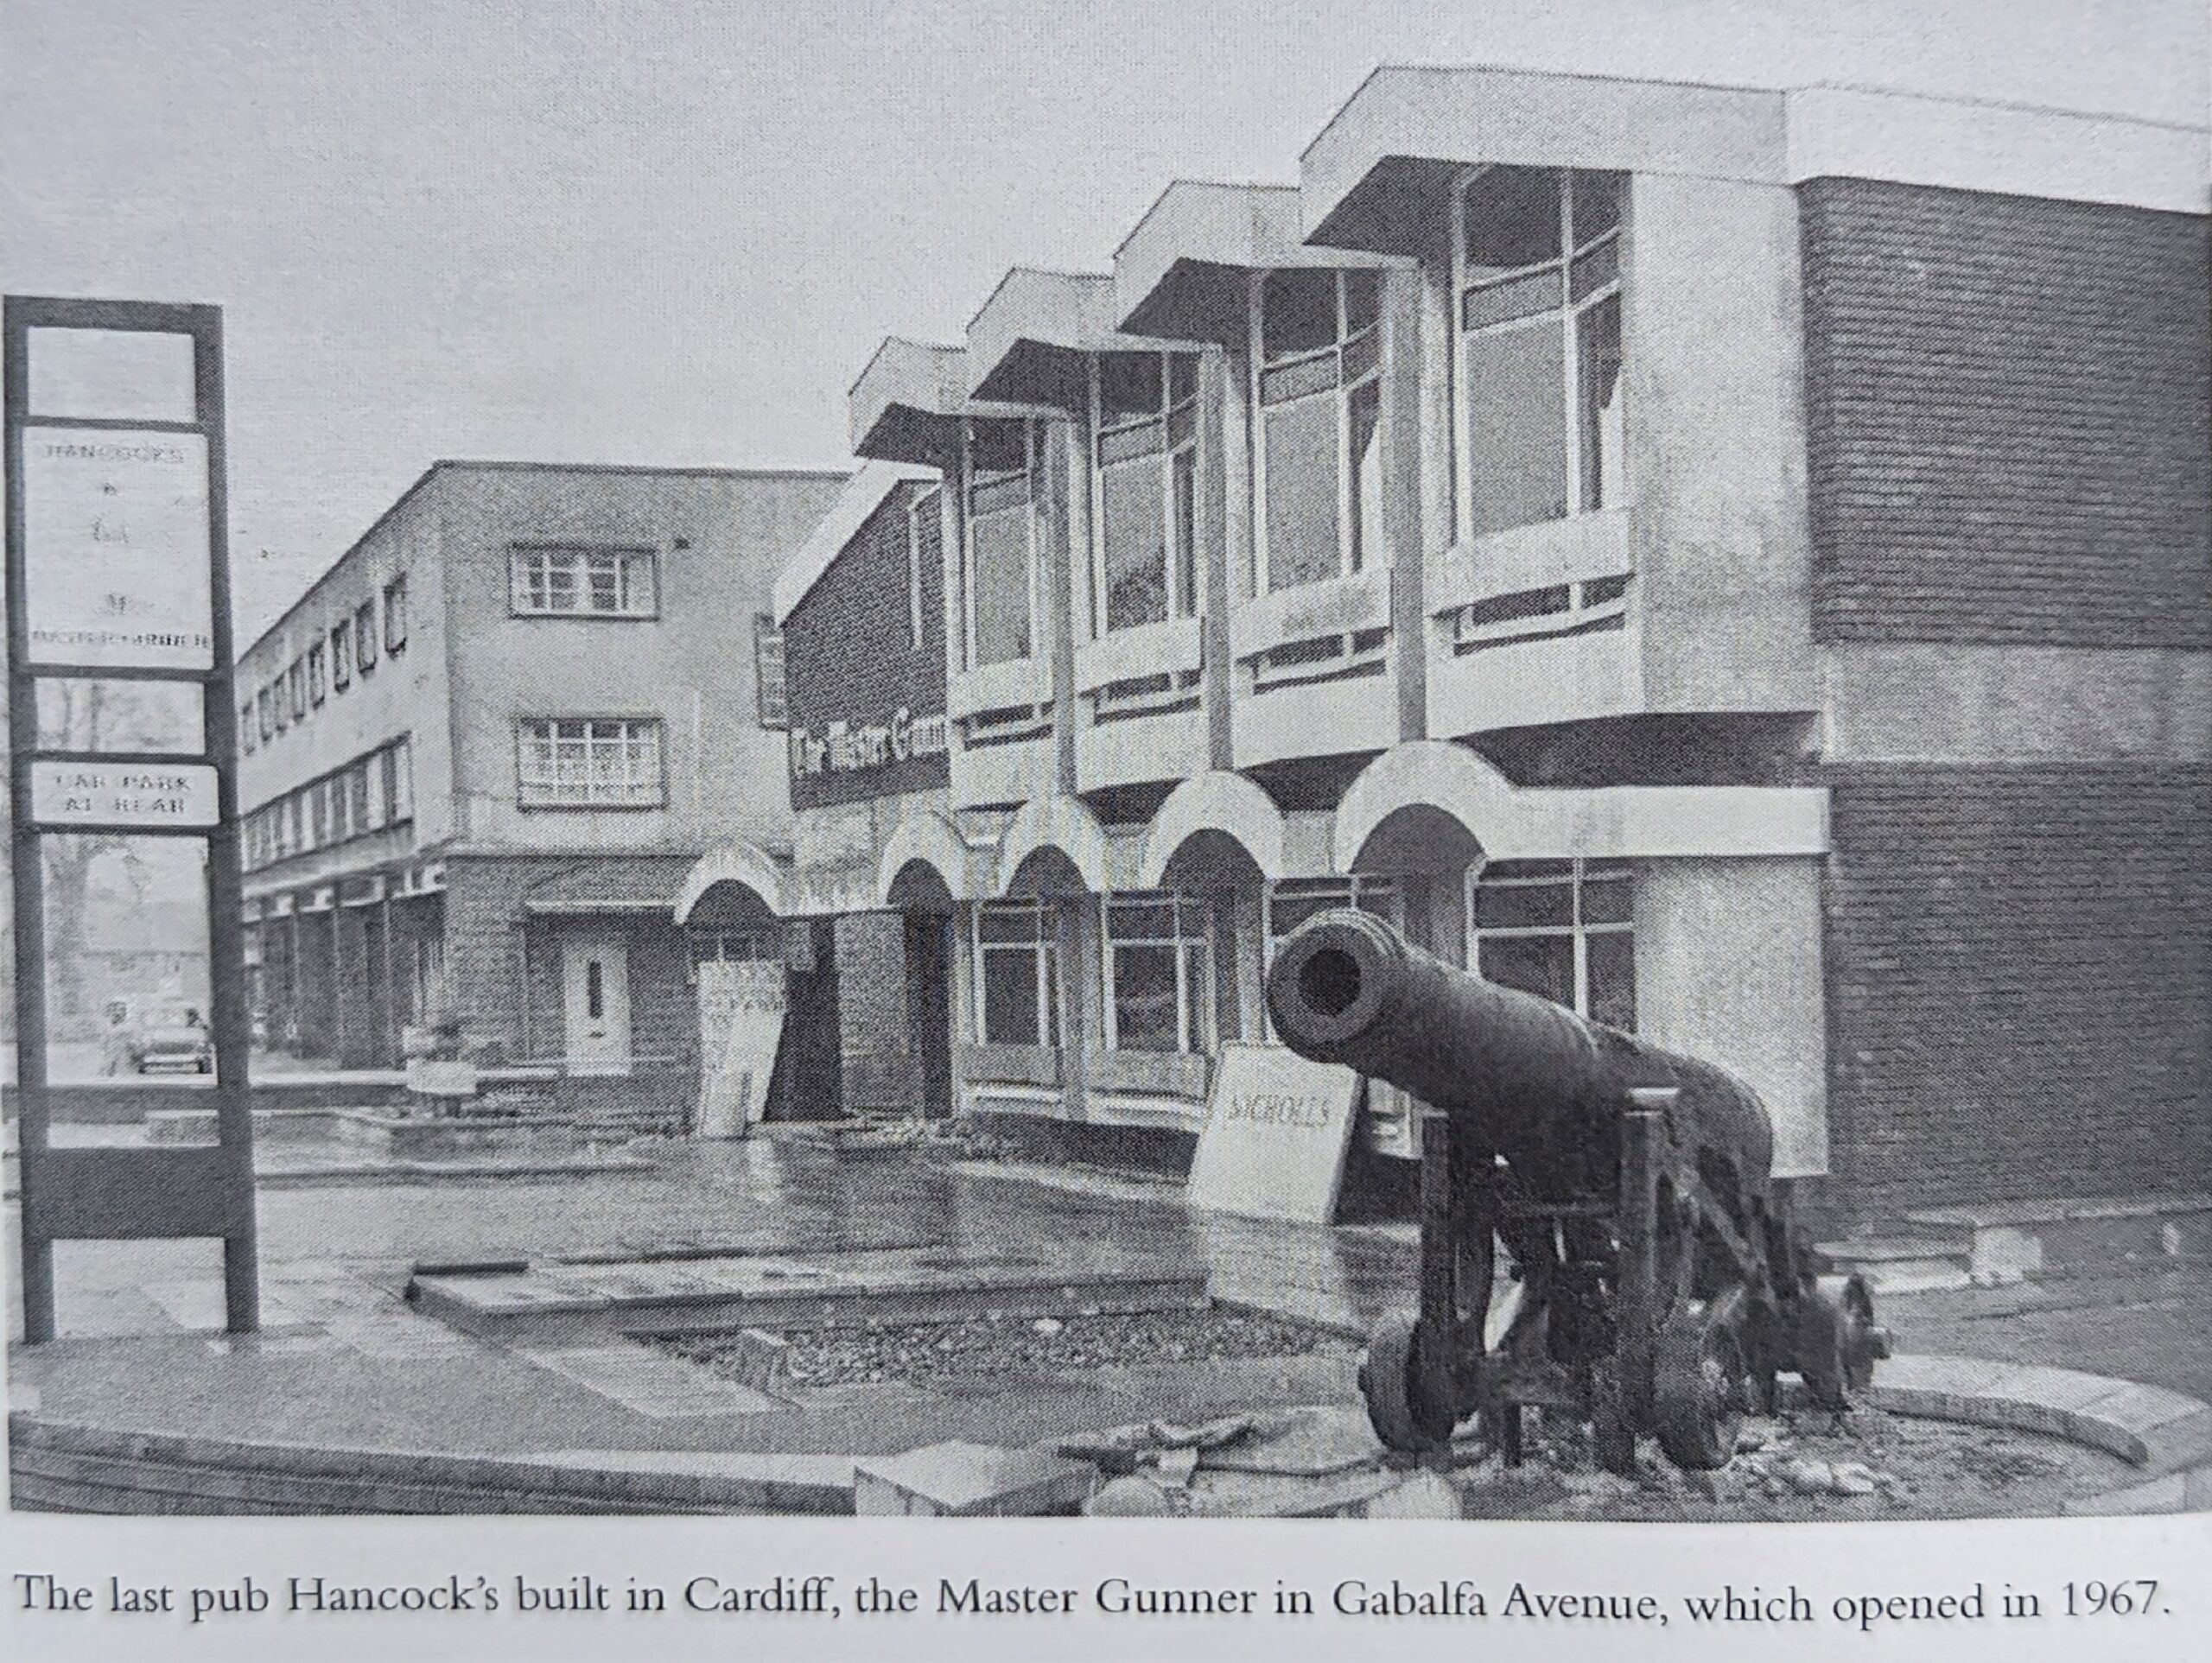 The Master Gunner, c.1968. (Glover, B. (2005) Images of Wales - Cardiff Pubs and Breweries. The History Press. p.51.)